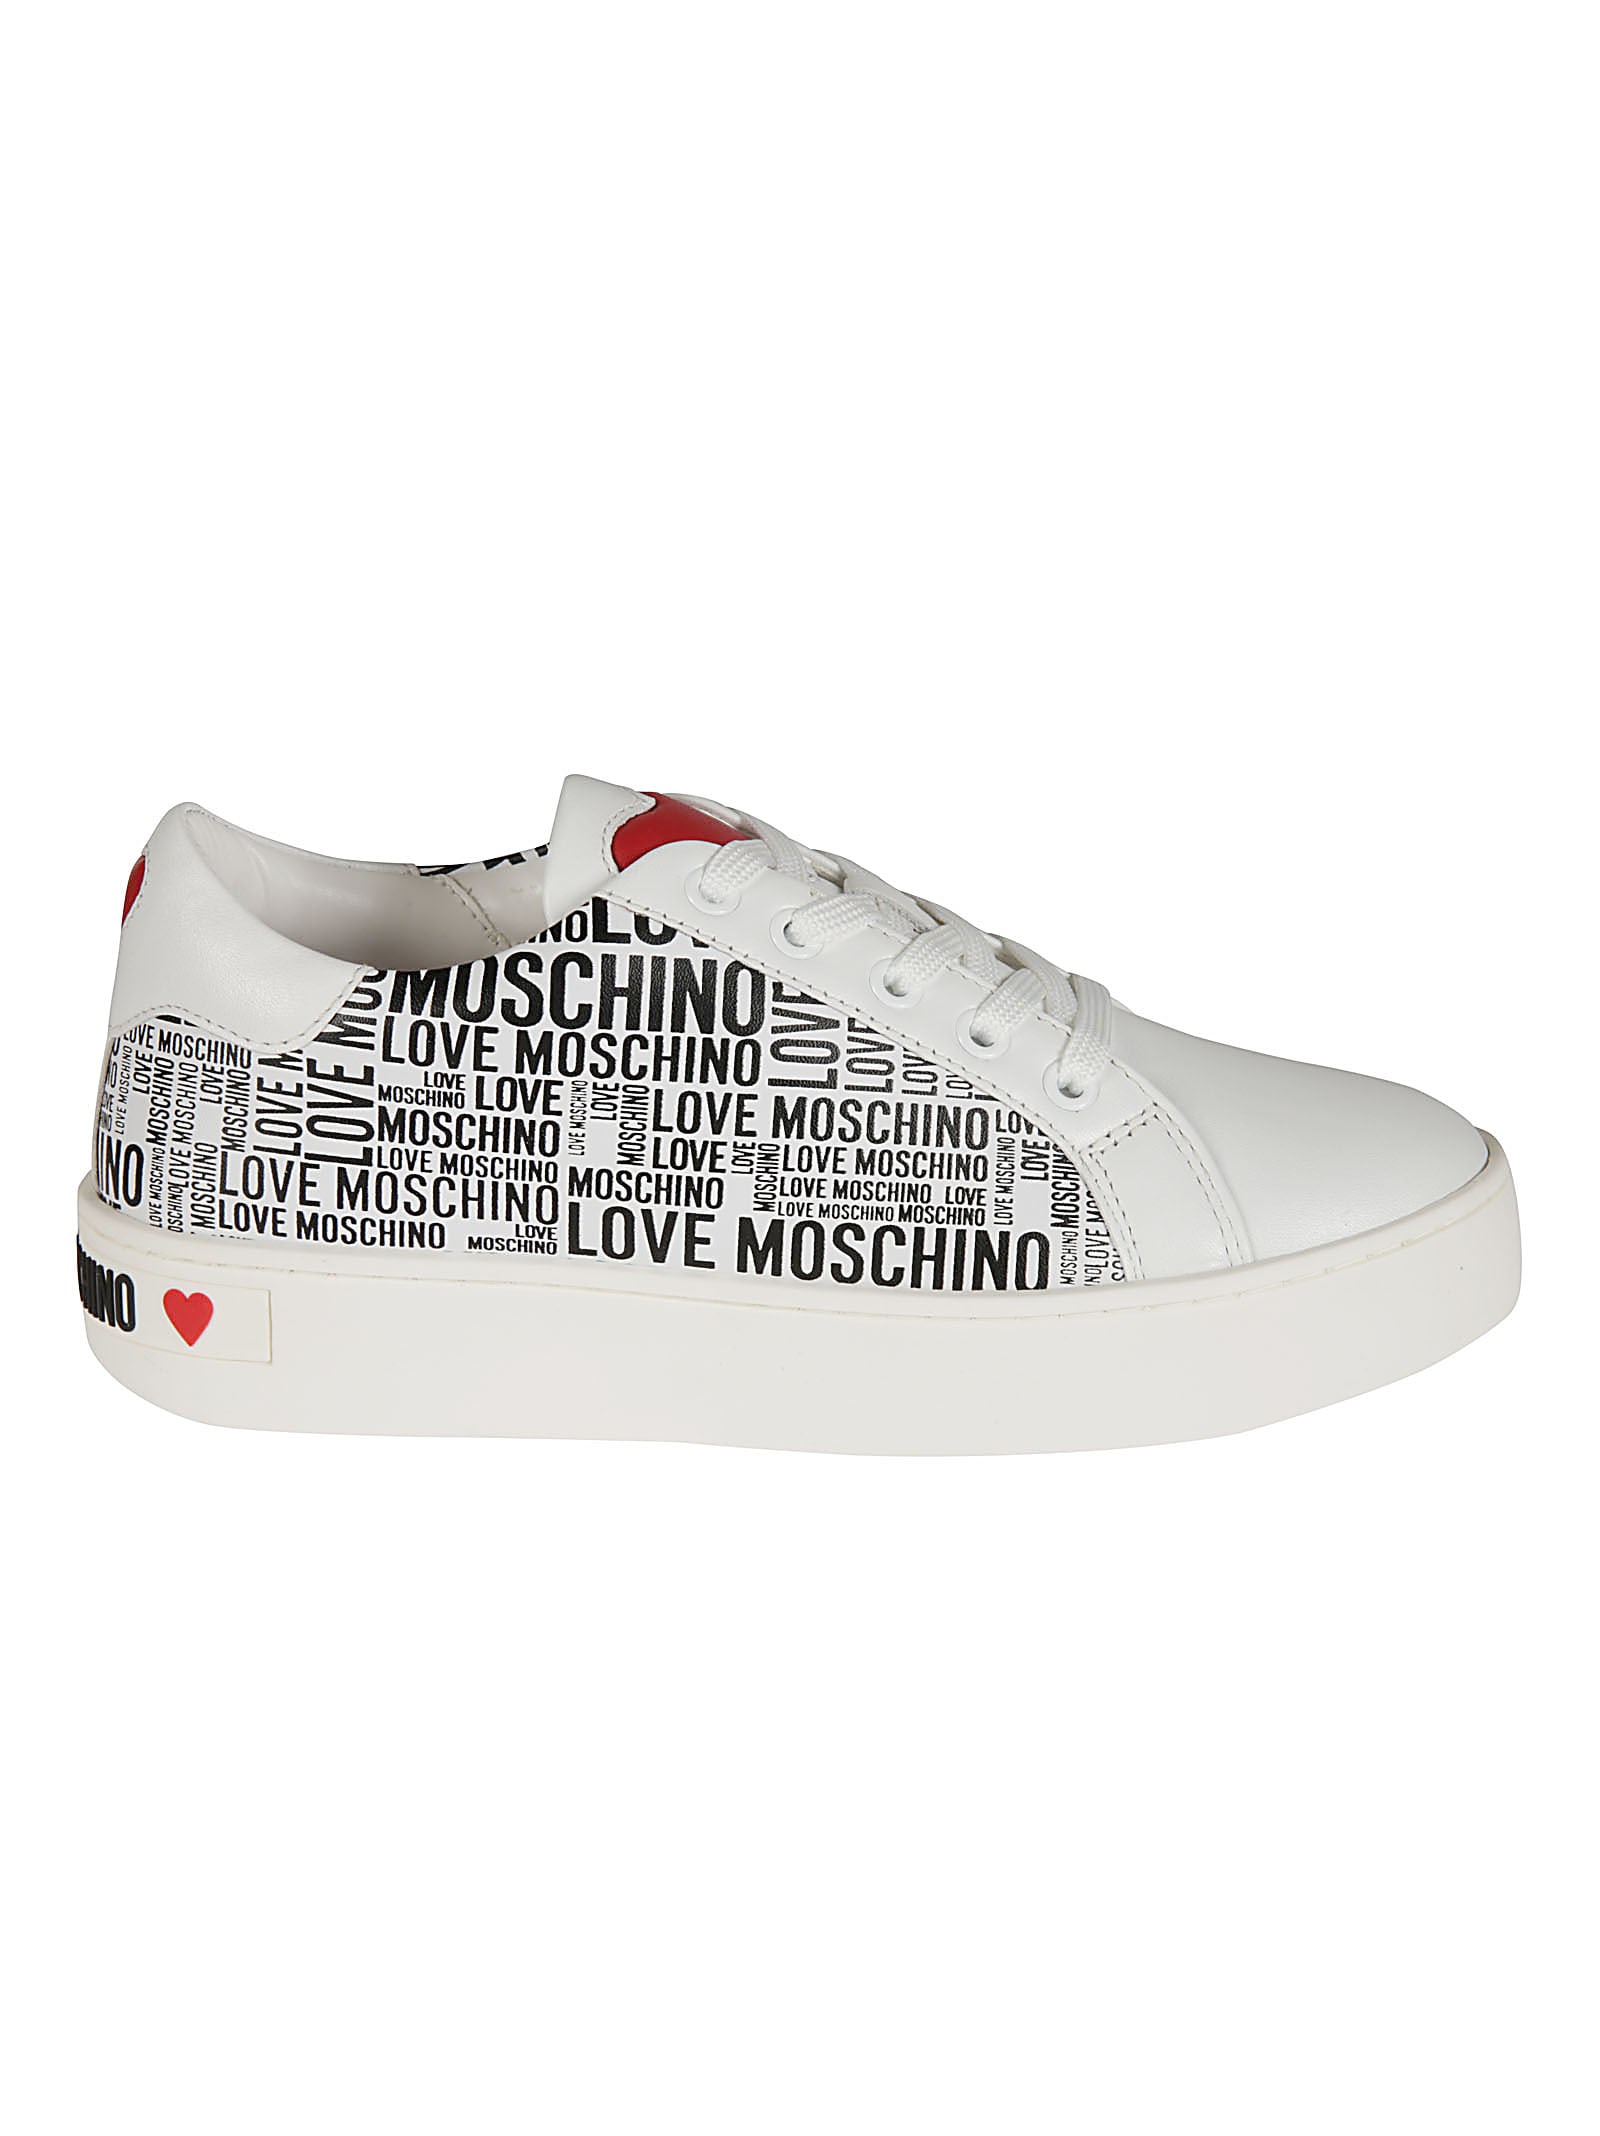 Love Moschino Low tops LOGO PRINTED SNEAKERS